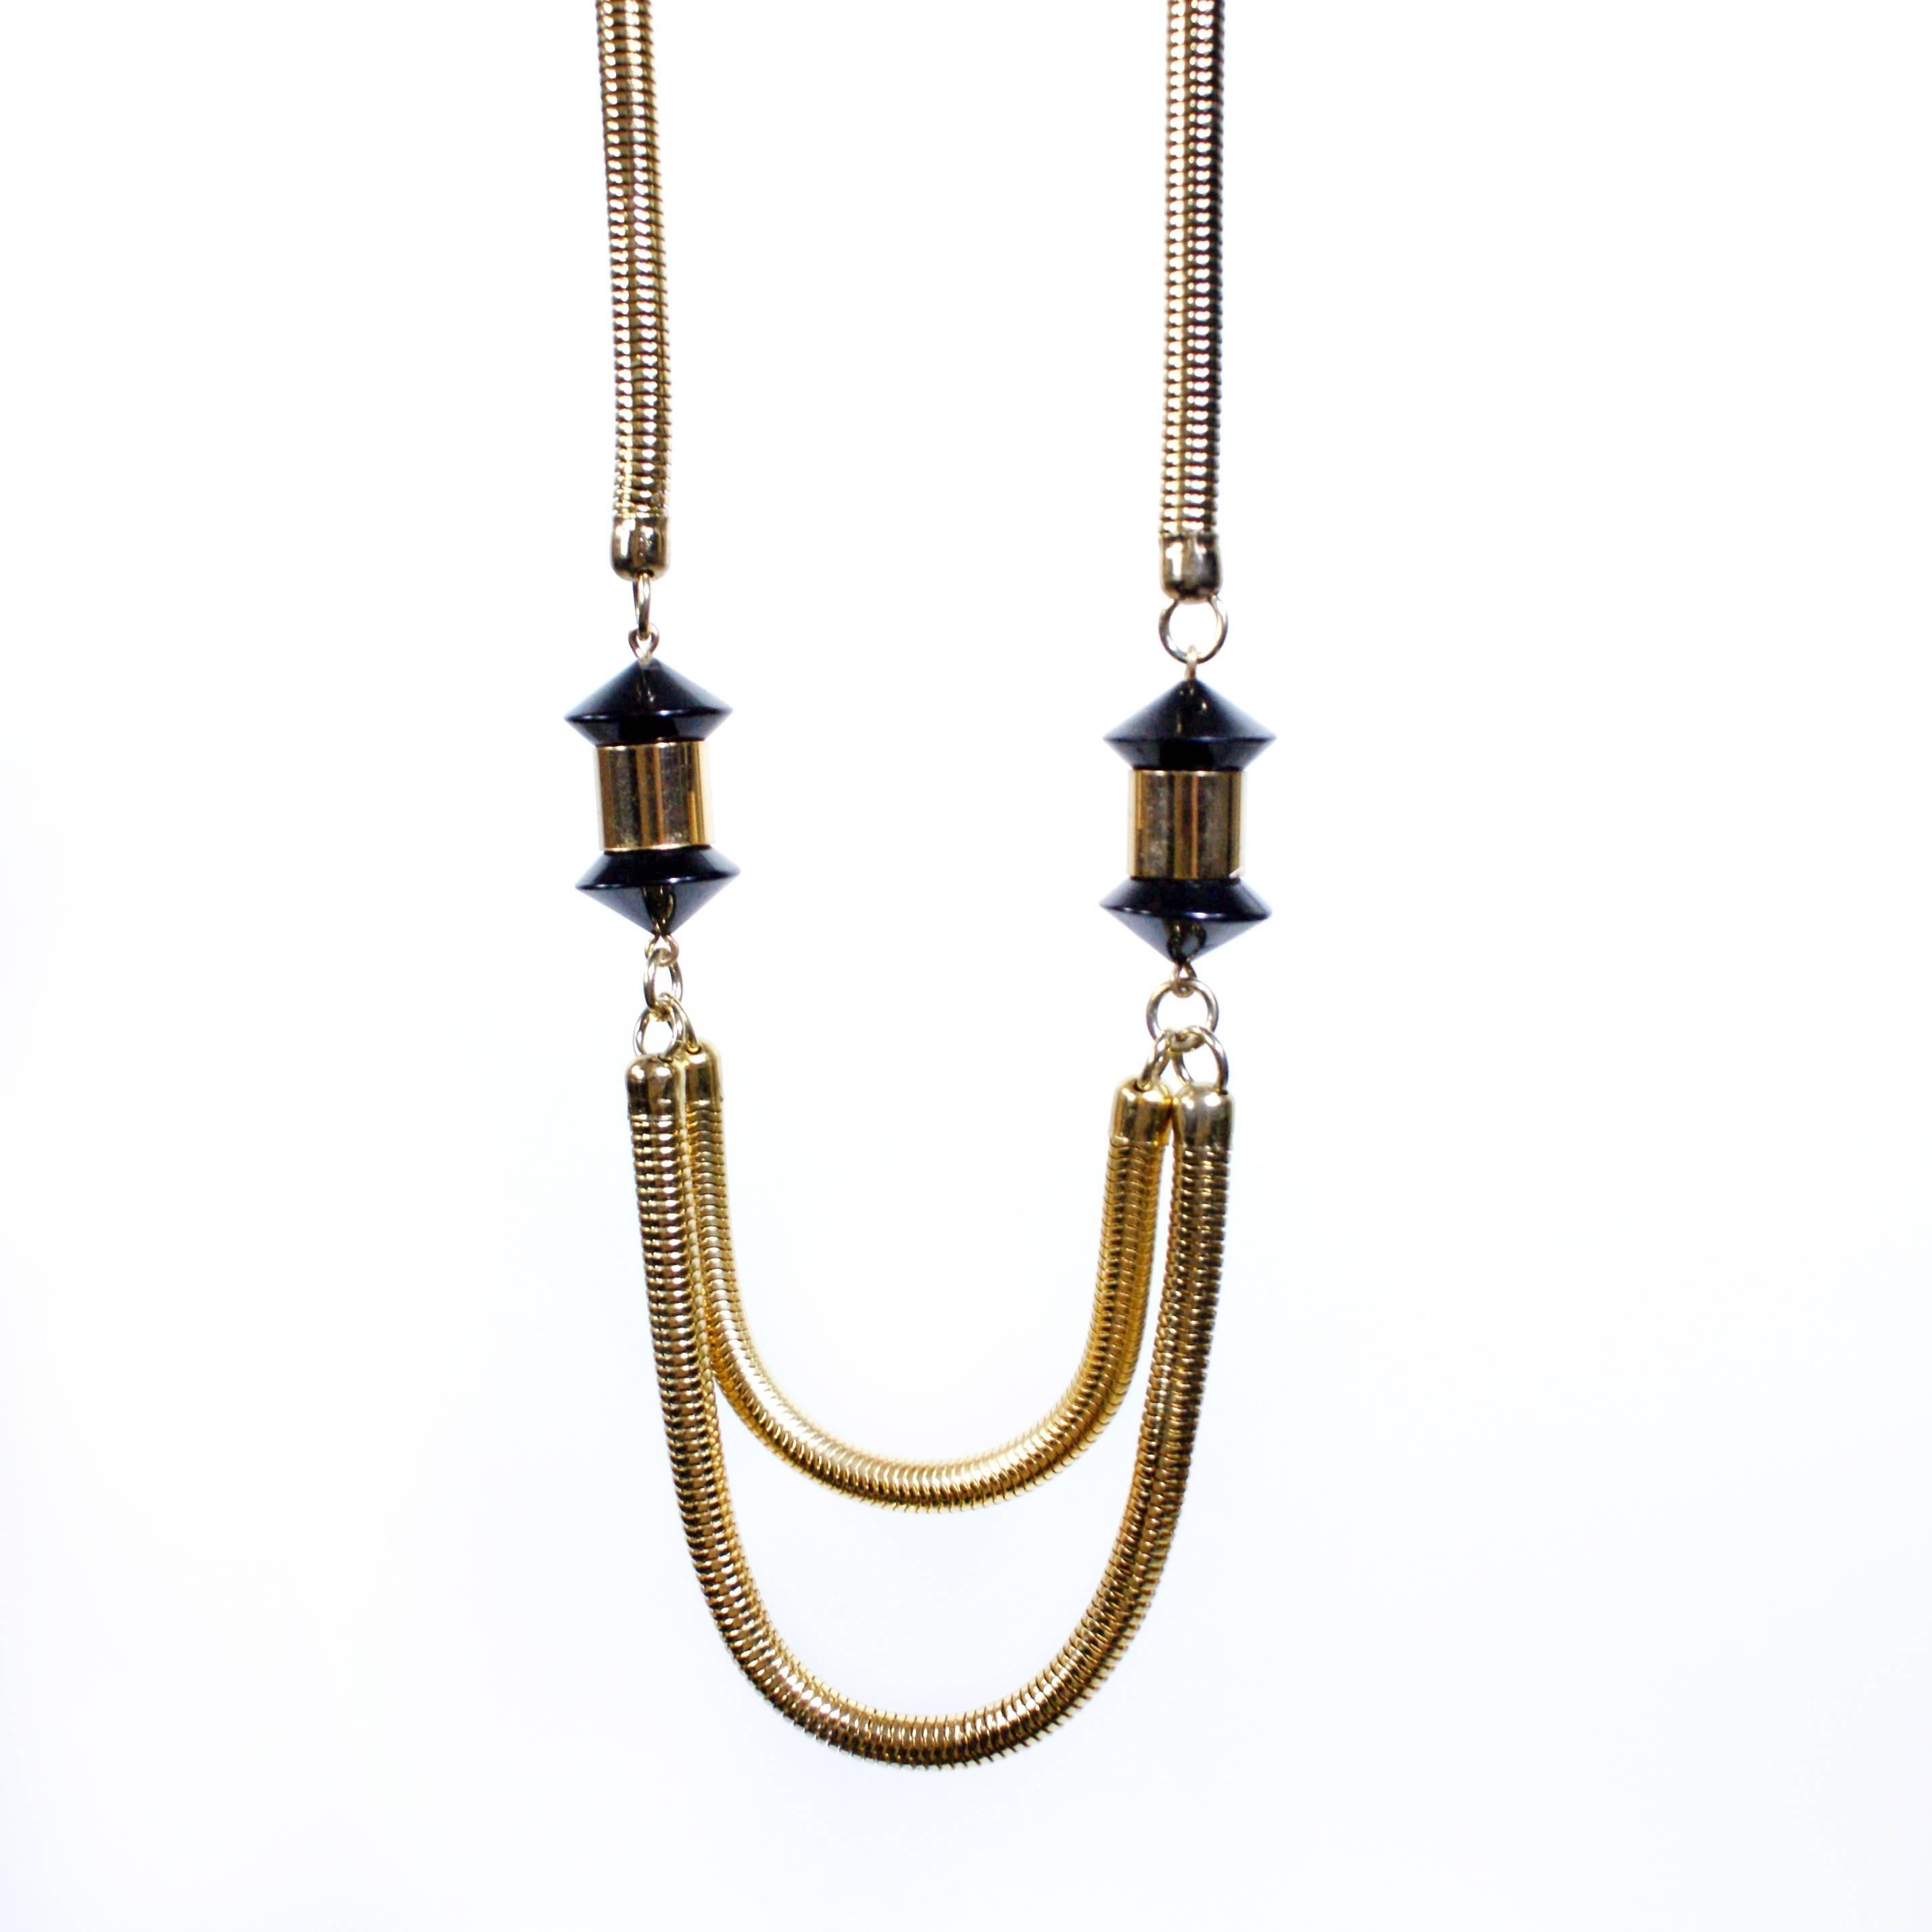 Two Tier Snake Chain Necklace With Lucite Pendants 
14